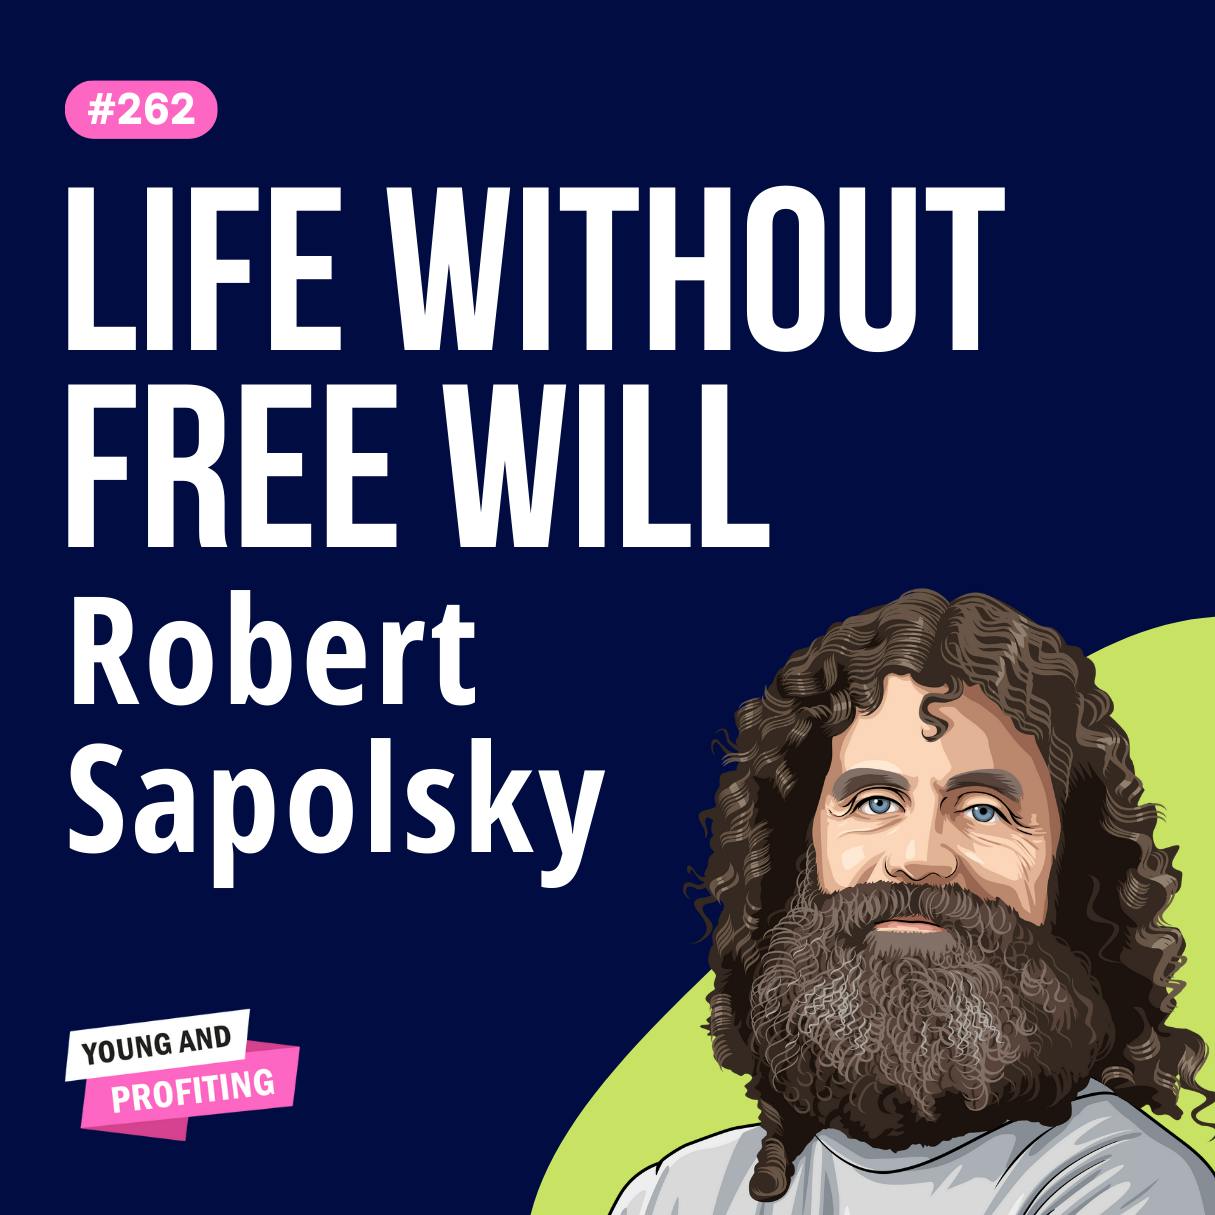 Robert Sapolsky: Free Will Doesn’t Exist! Leading Neuroscientist Claims ALL Behavior Is Biologically Determined | E262